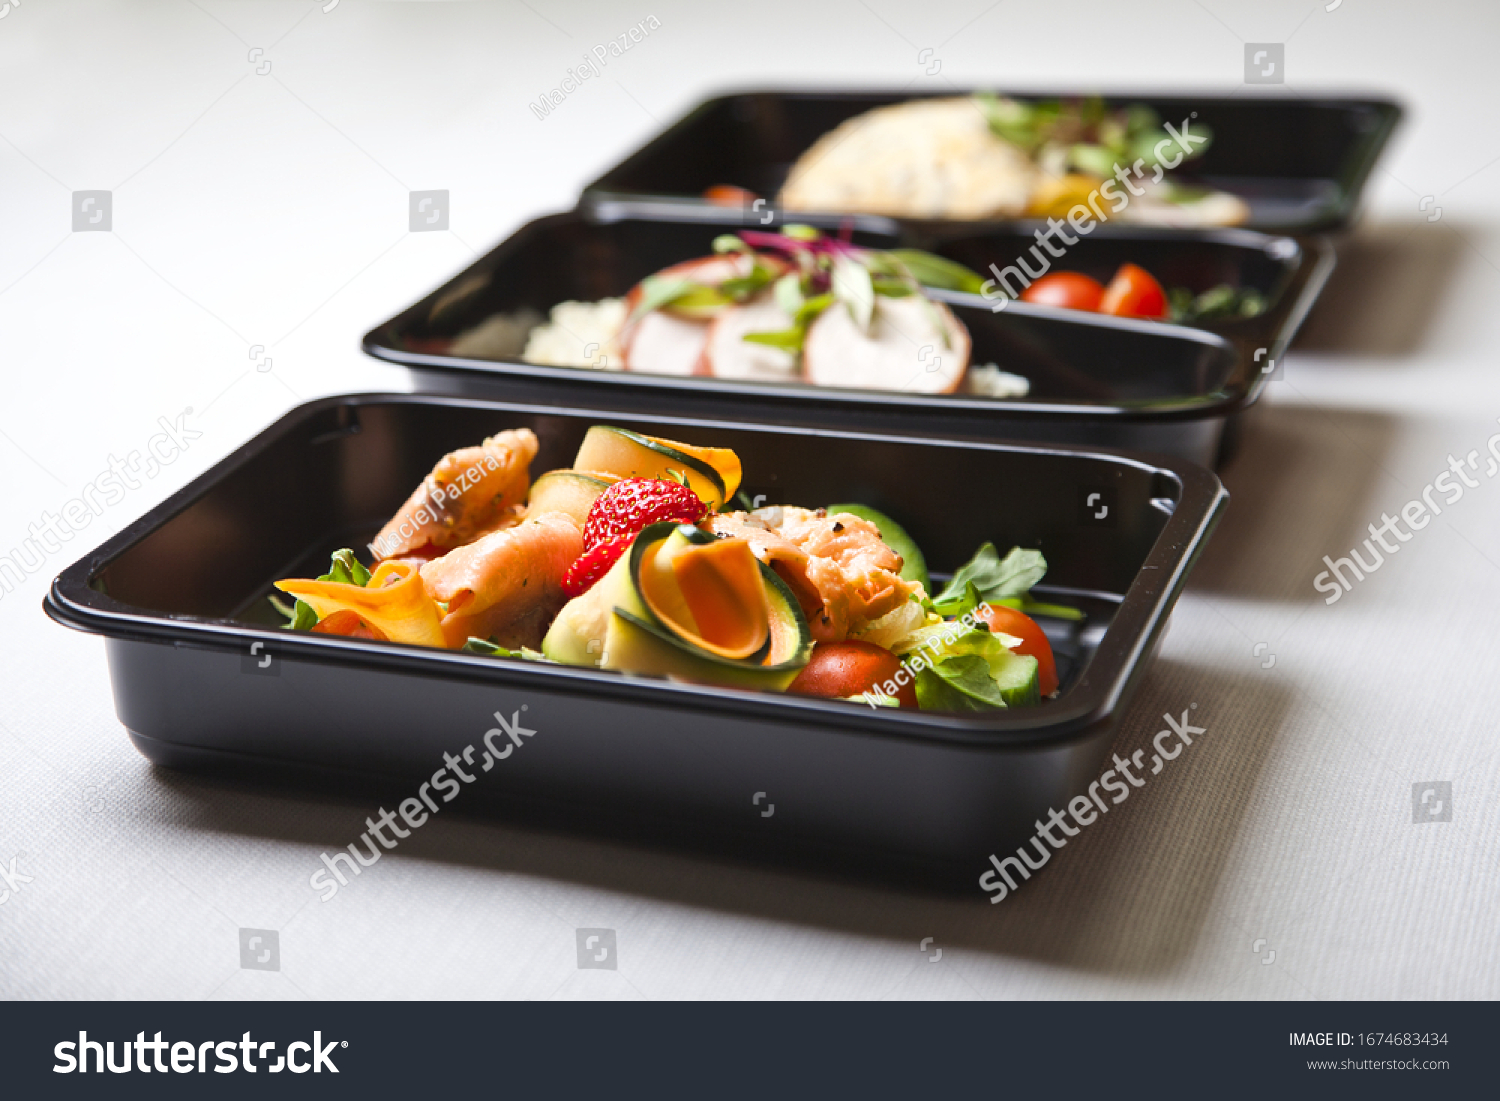 Catering food with healthy balanced diet delicious lunch box gastronomy boxed take away deliver packed ready meal in black container restaurant inn dinner, meal, brakfast #1674683434